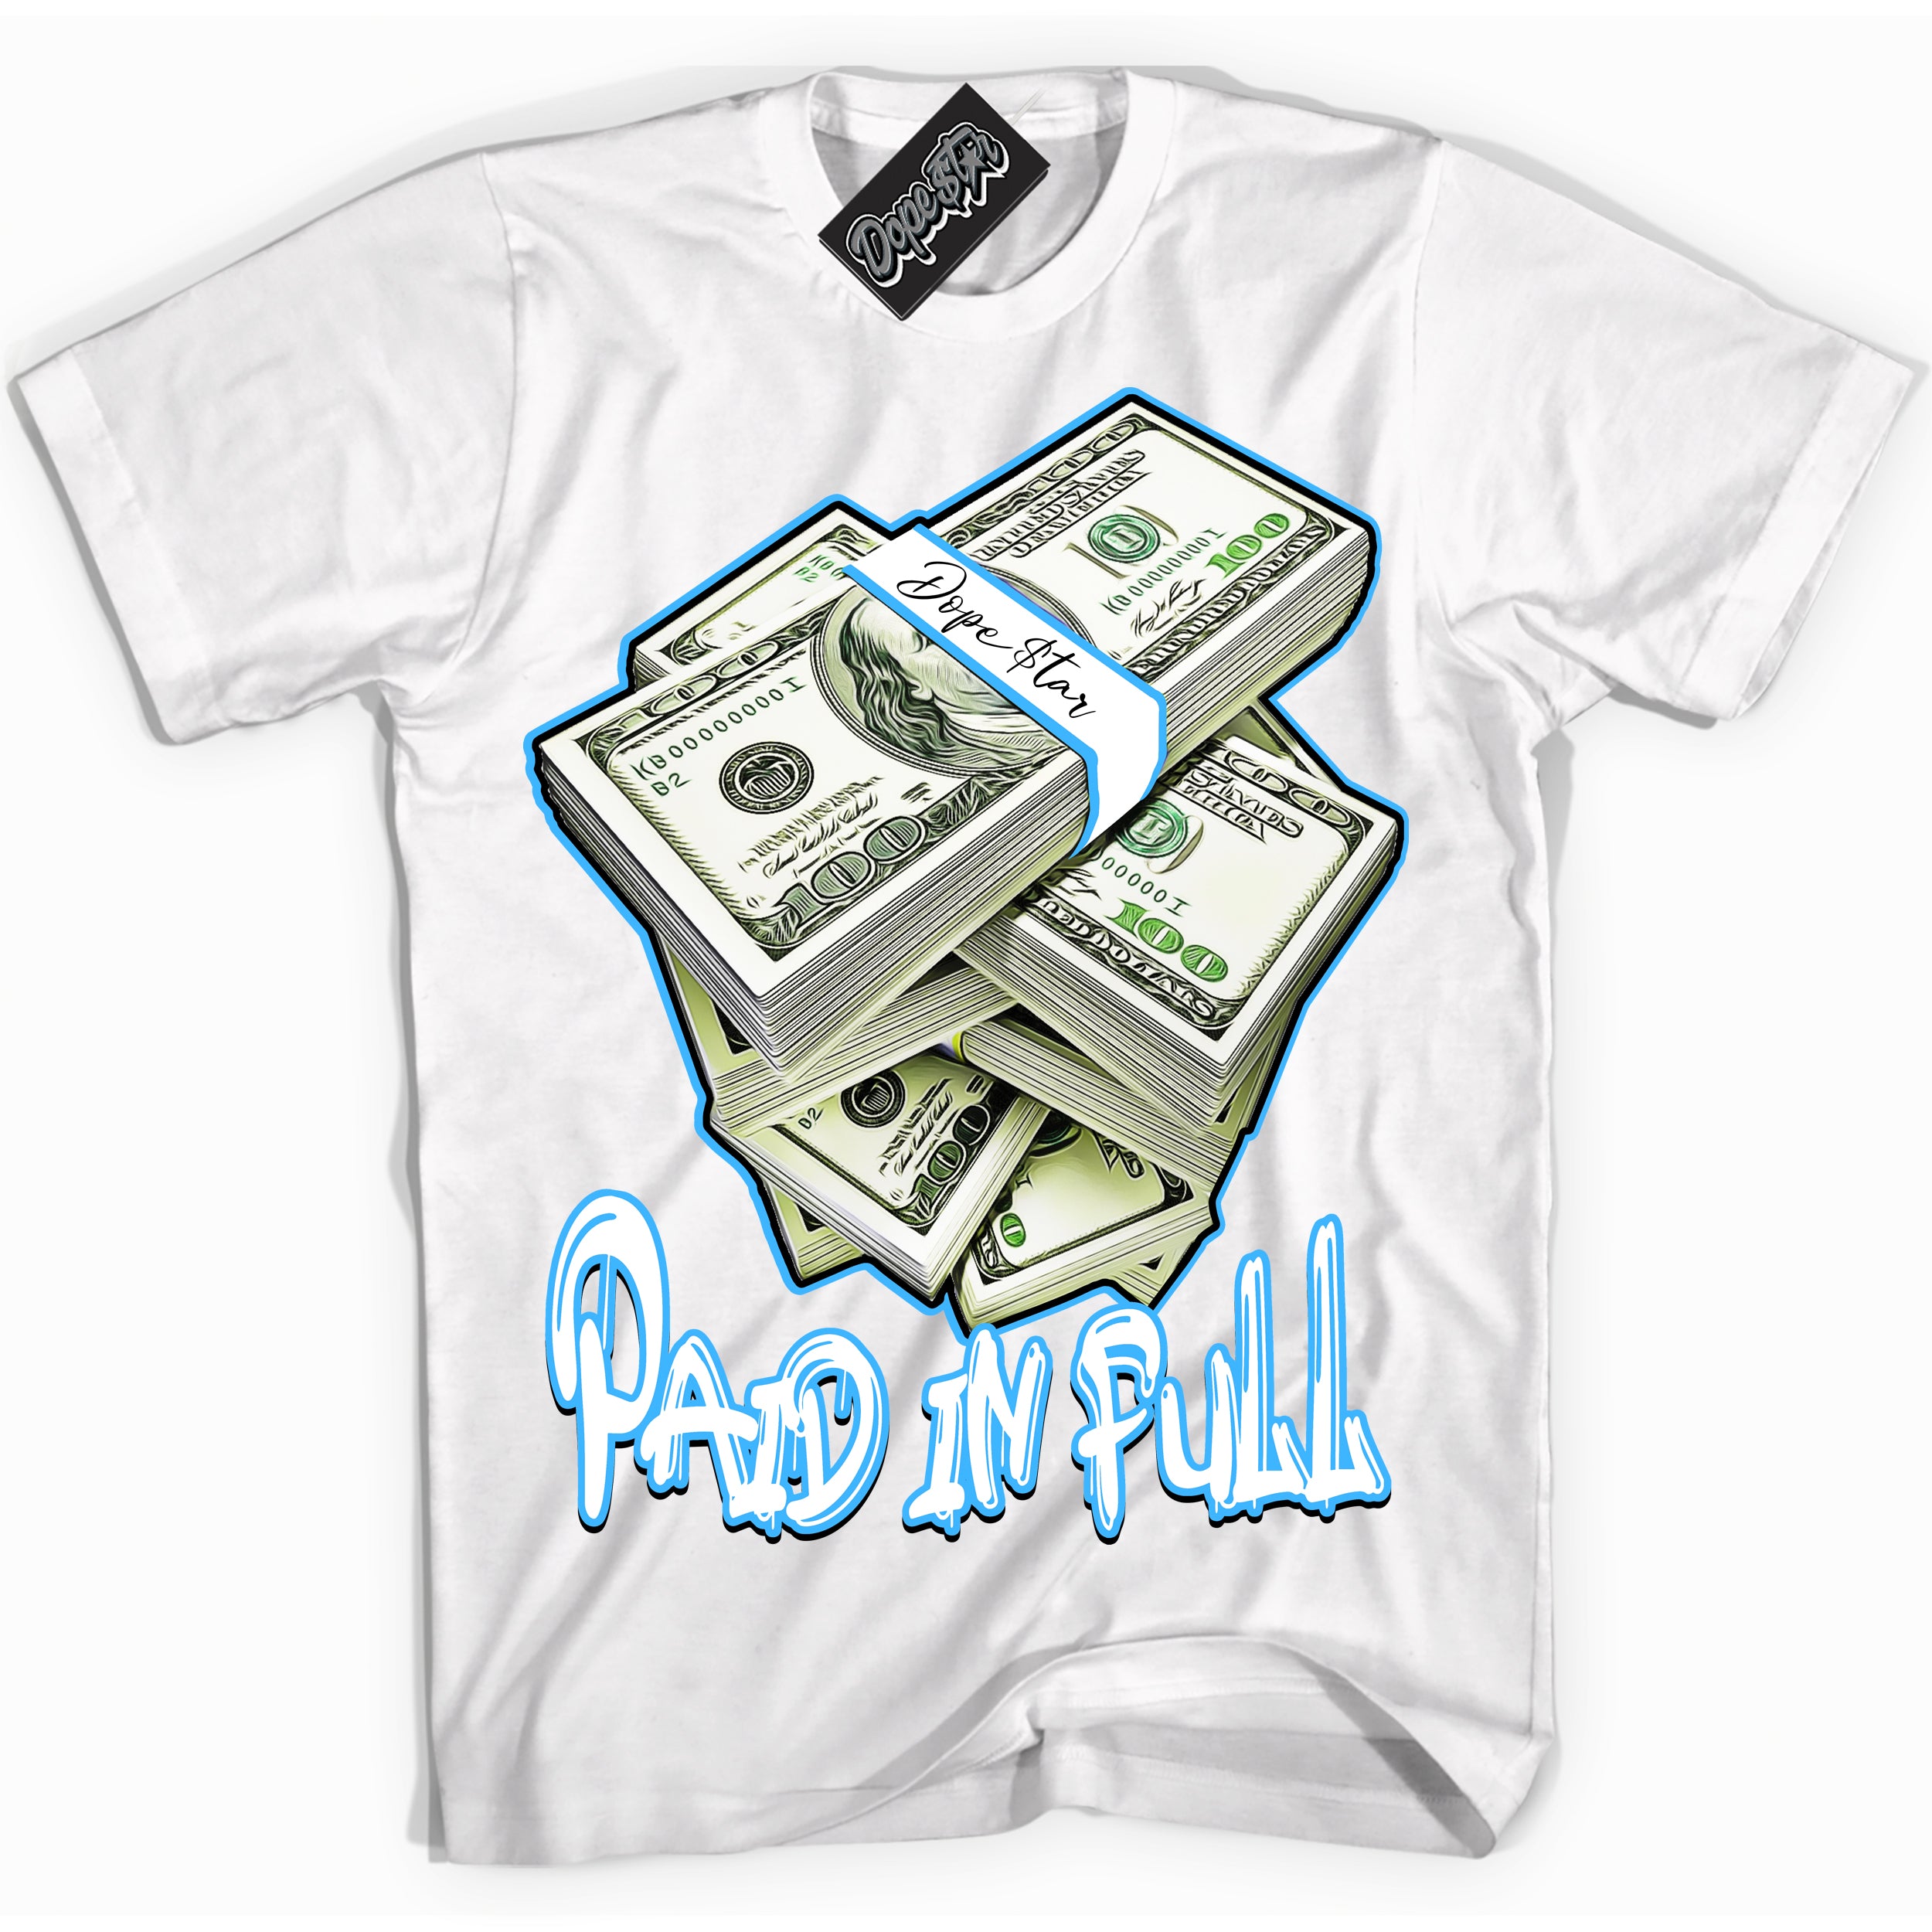 Cool White graphic tee with “ Paid In Full ” design, that perfectly matches Powder Blue 9s sneakers 